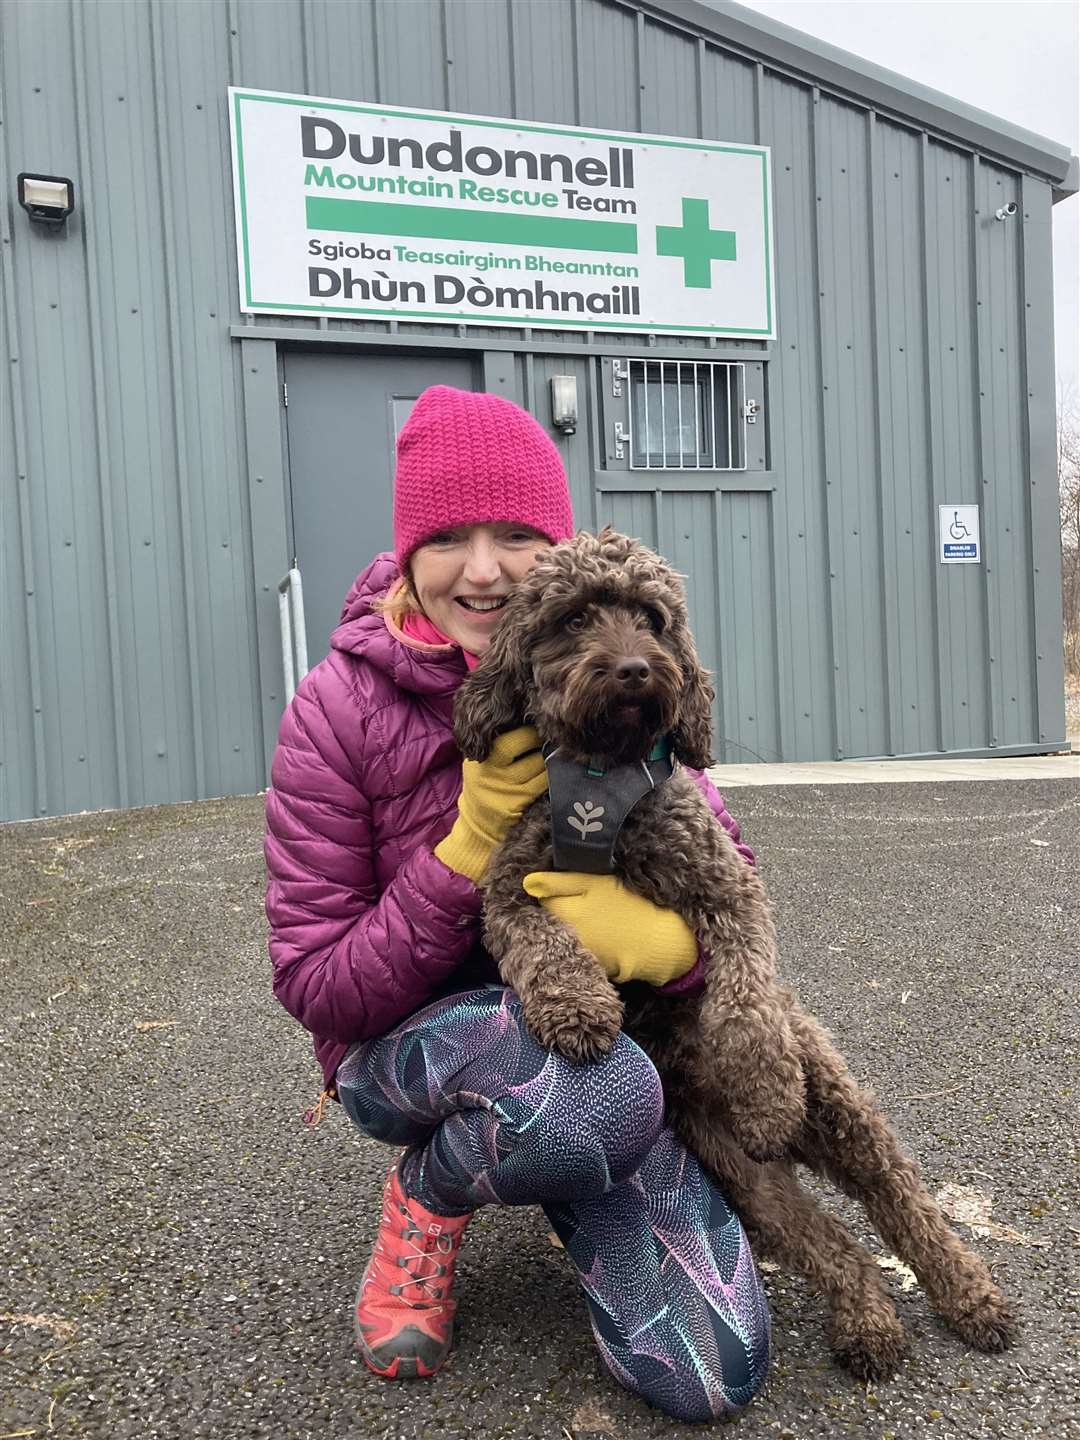 Jacqueline MacDonald is raising money for Dundonnell Mountain Rescue Team, after not being able to visit her friend in Orkney.